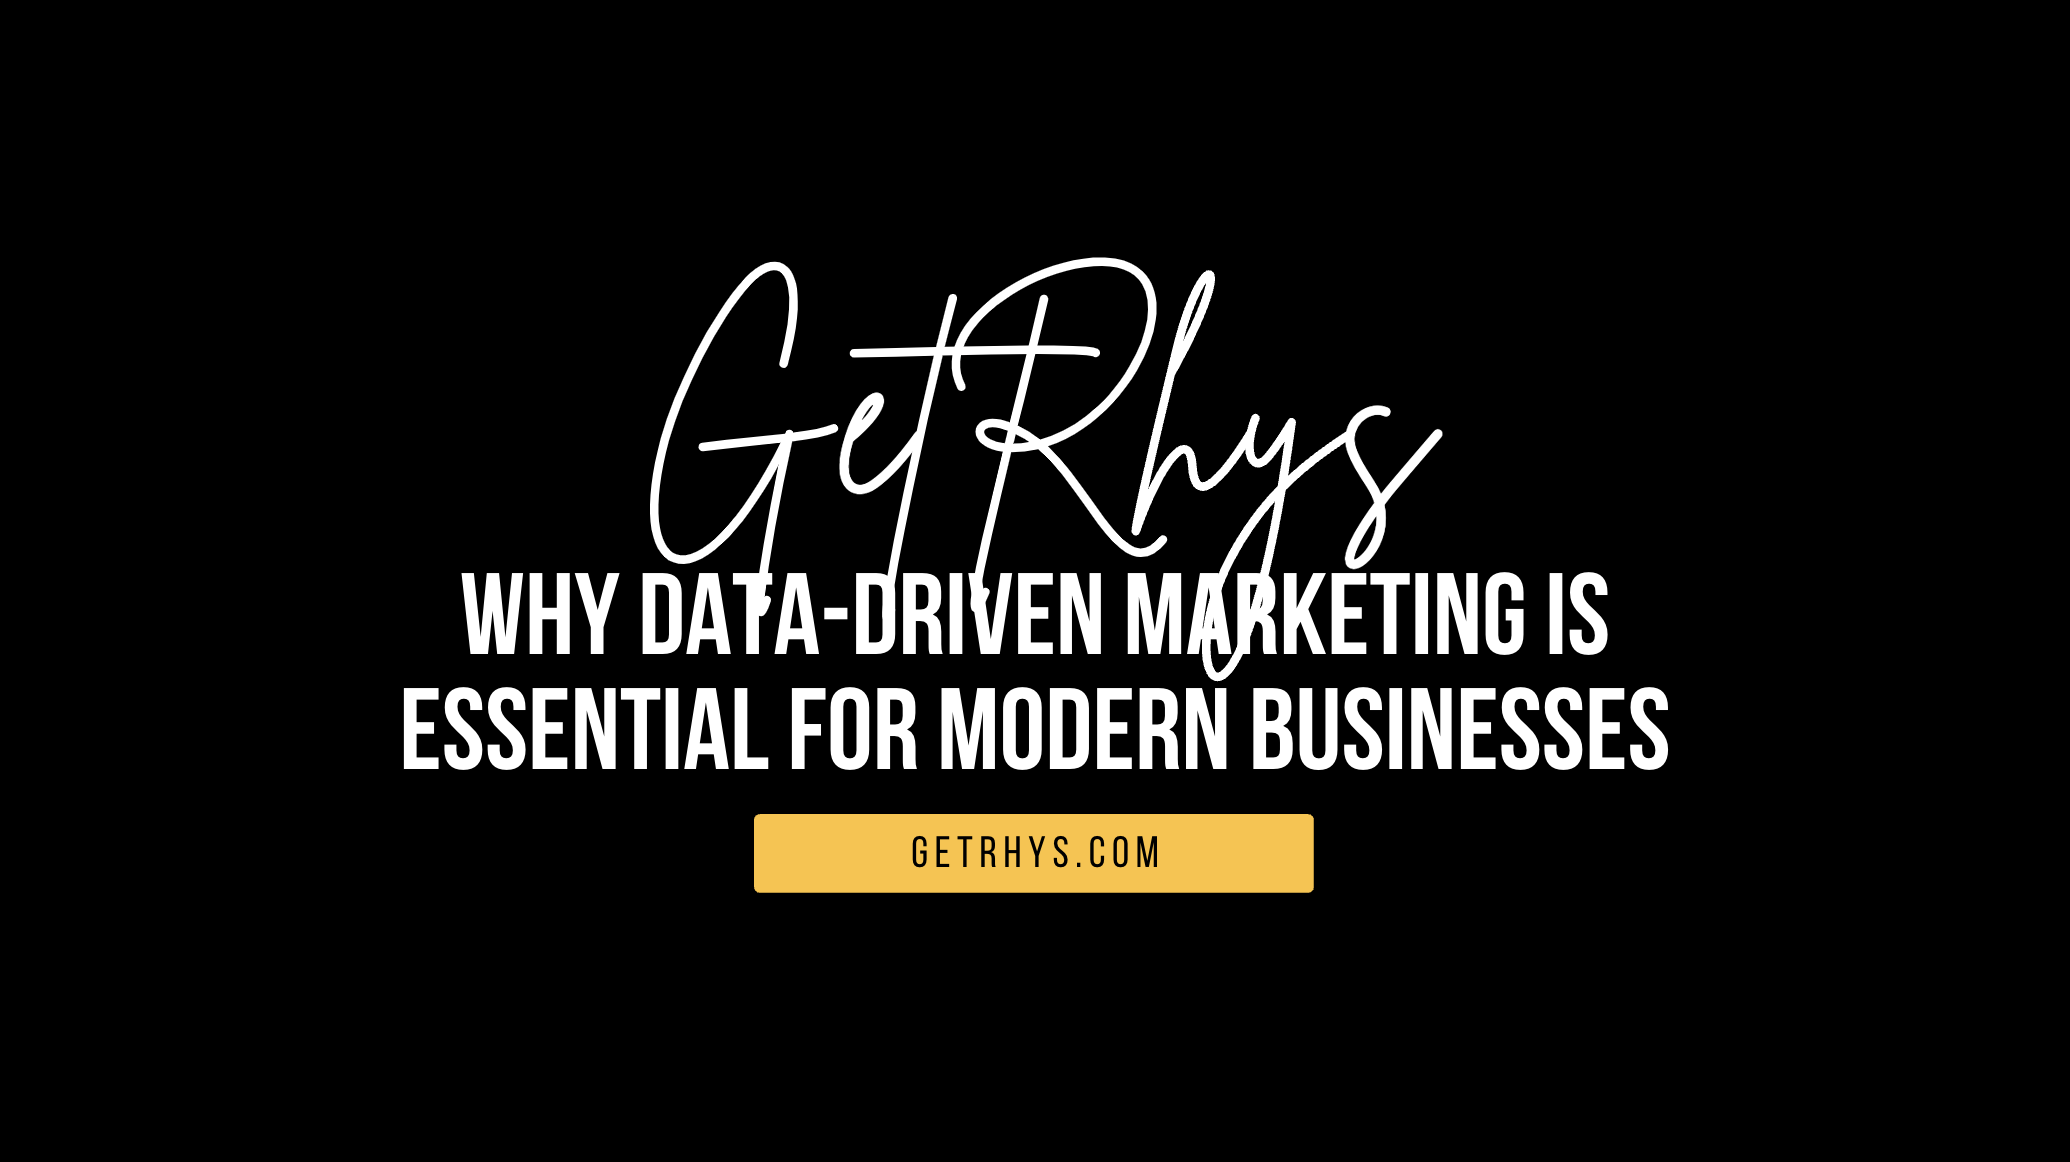 Why data-driven marketing is essential for modern businesses